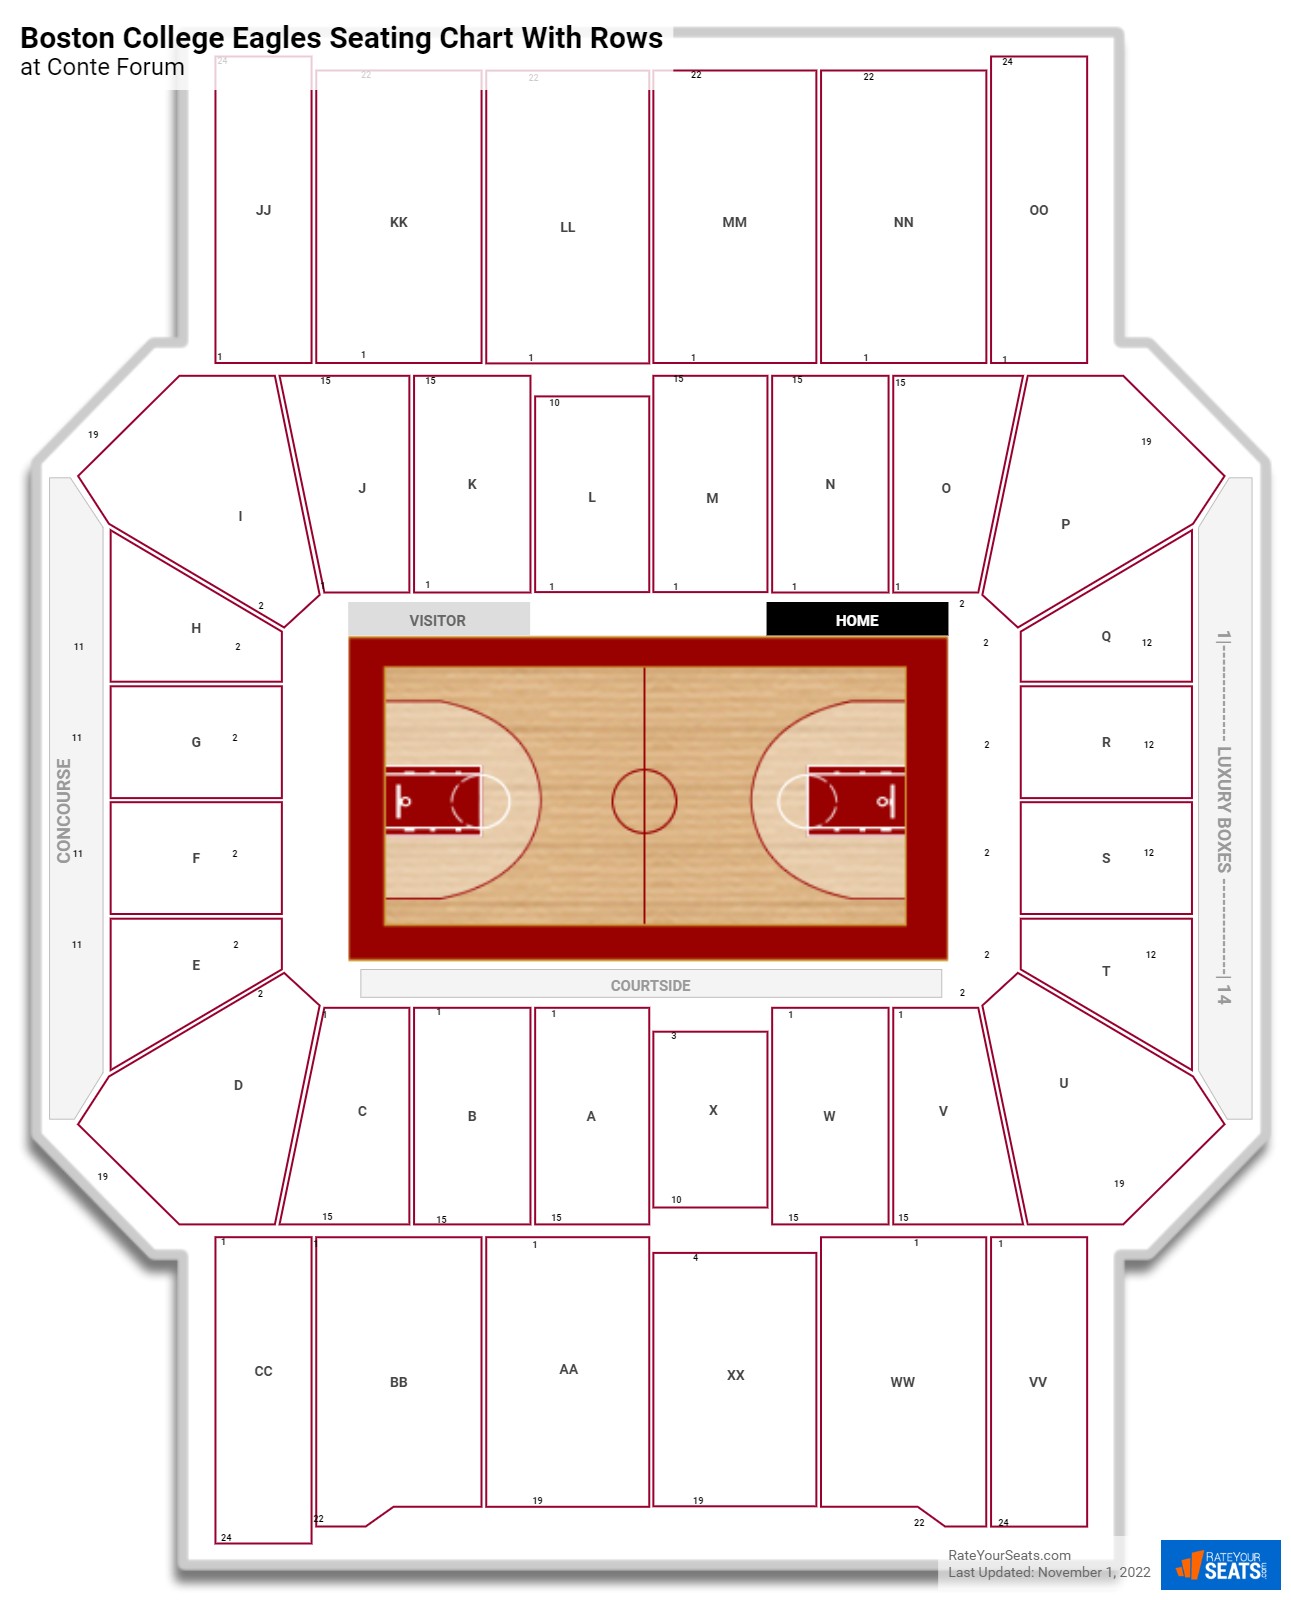 Conte Forum seating chart with row numbers